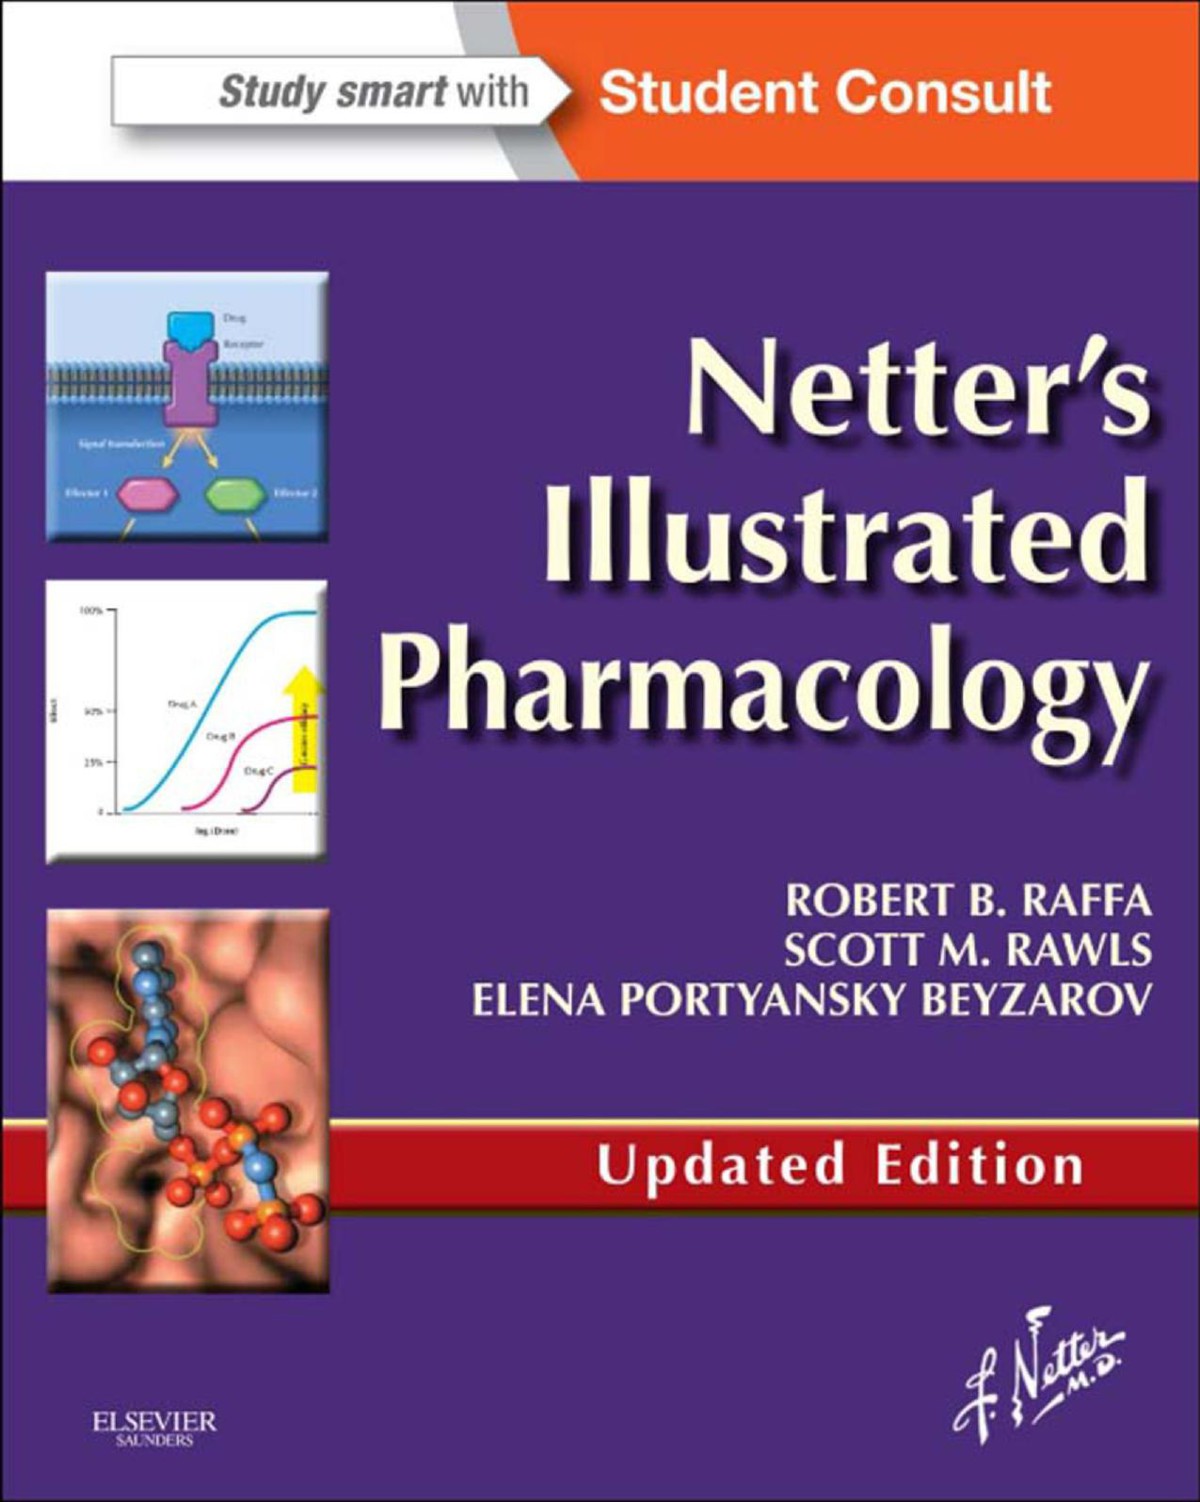 Netter's Illustrated Pharmacology Updated Edition PDF